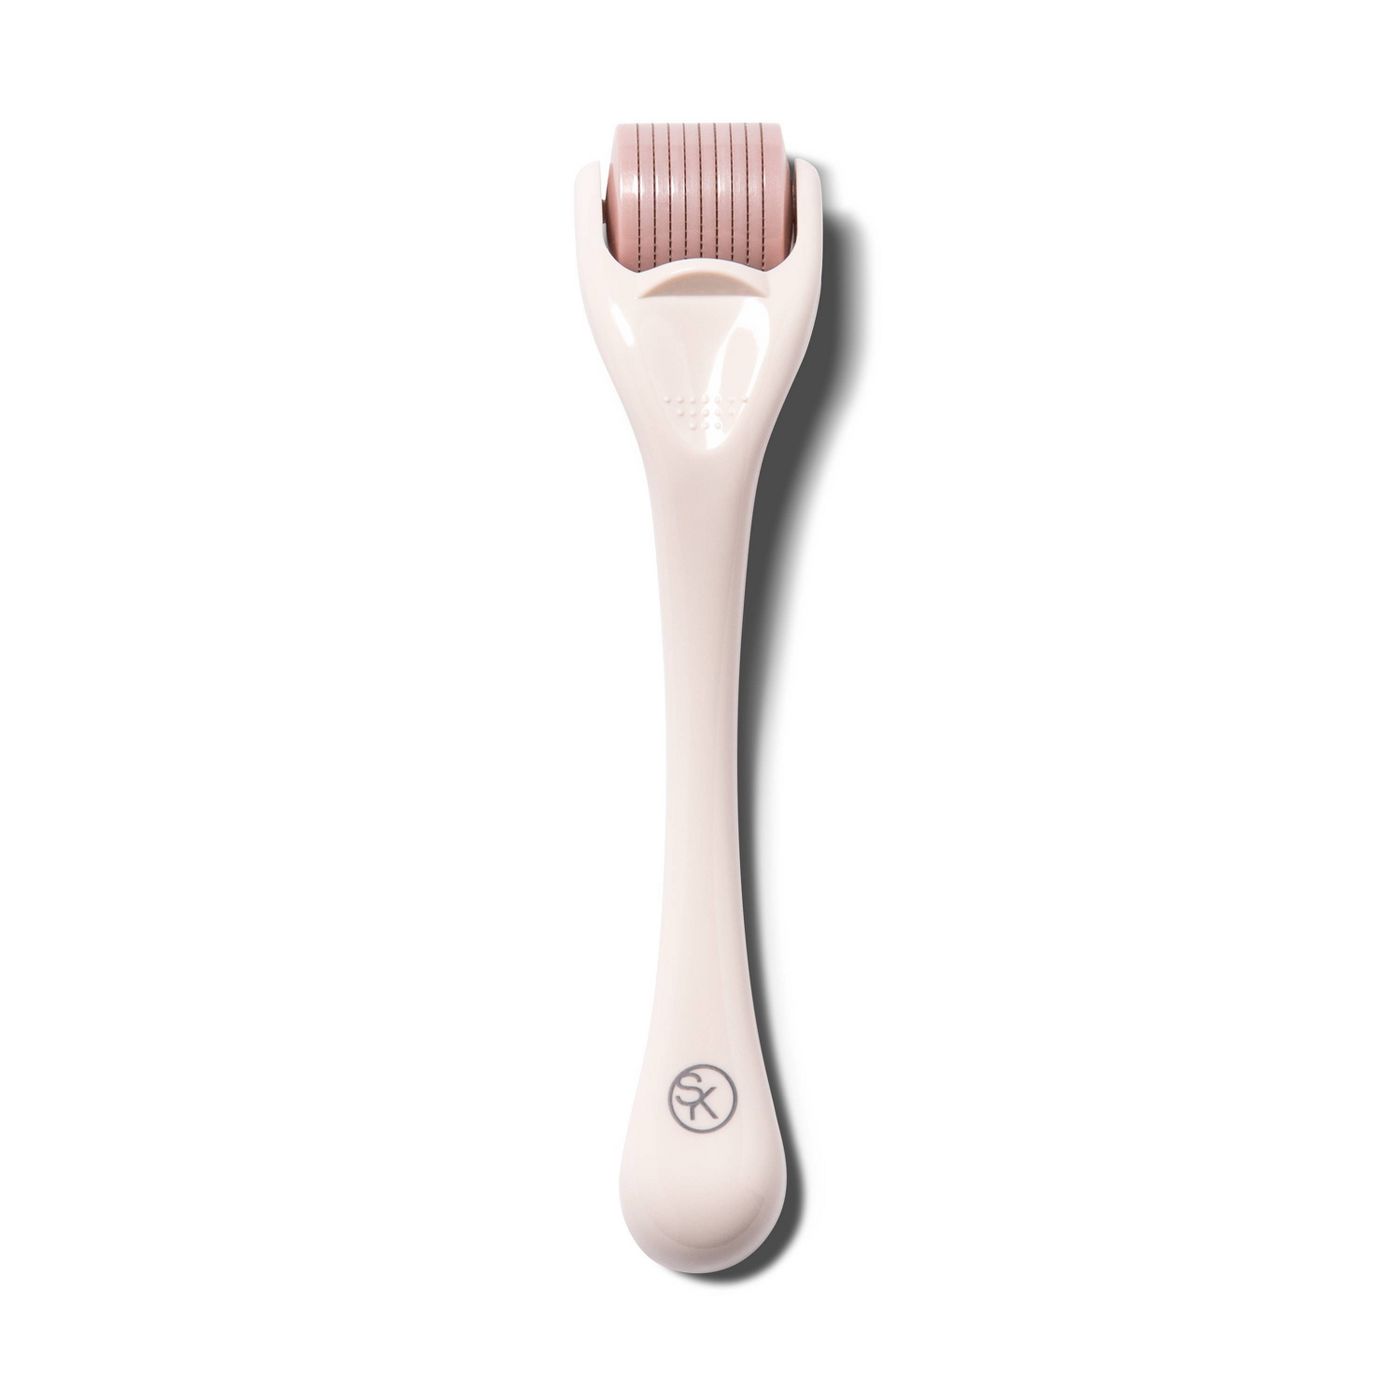 Sonia Kashuk™ Microneedle Facial Roller - image 1 of 6